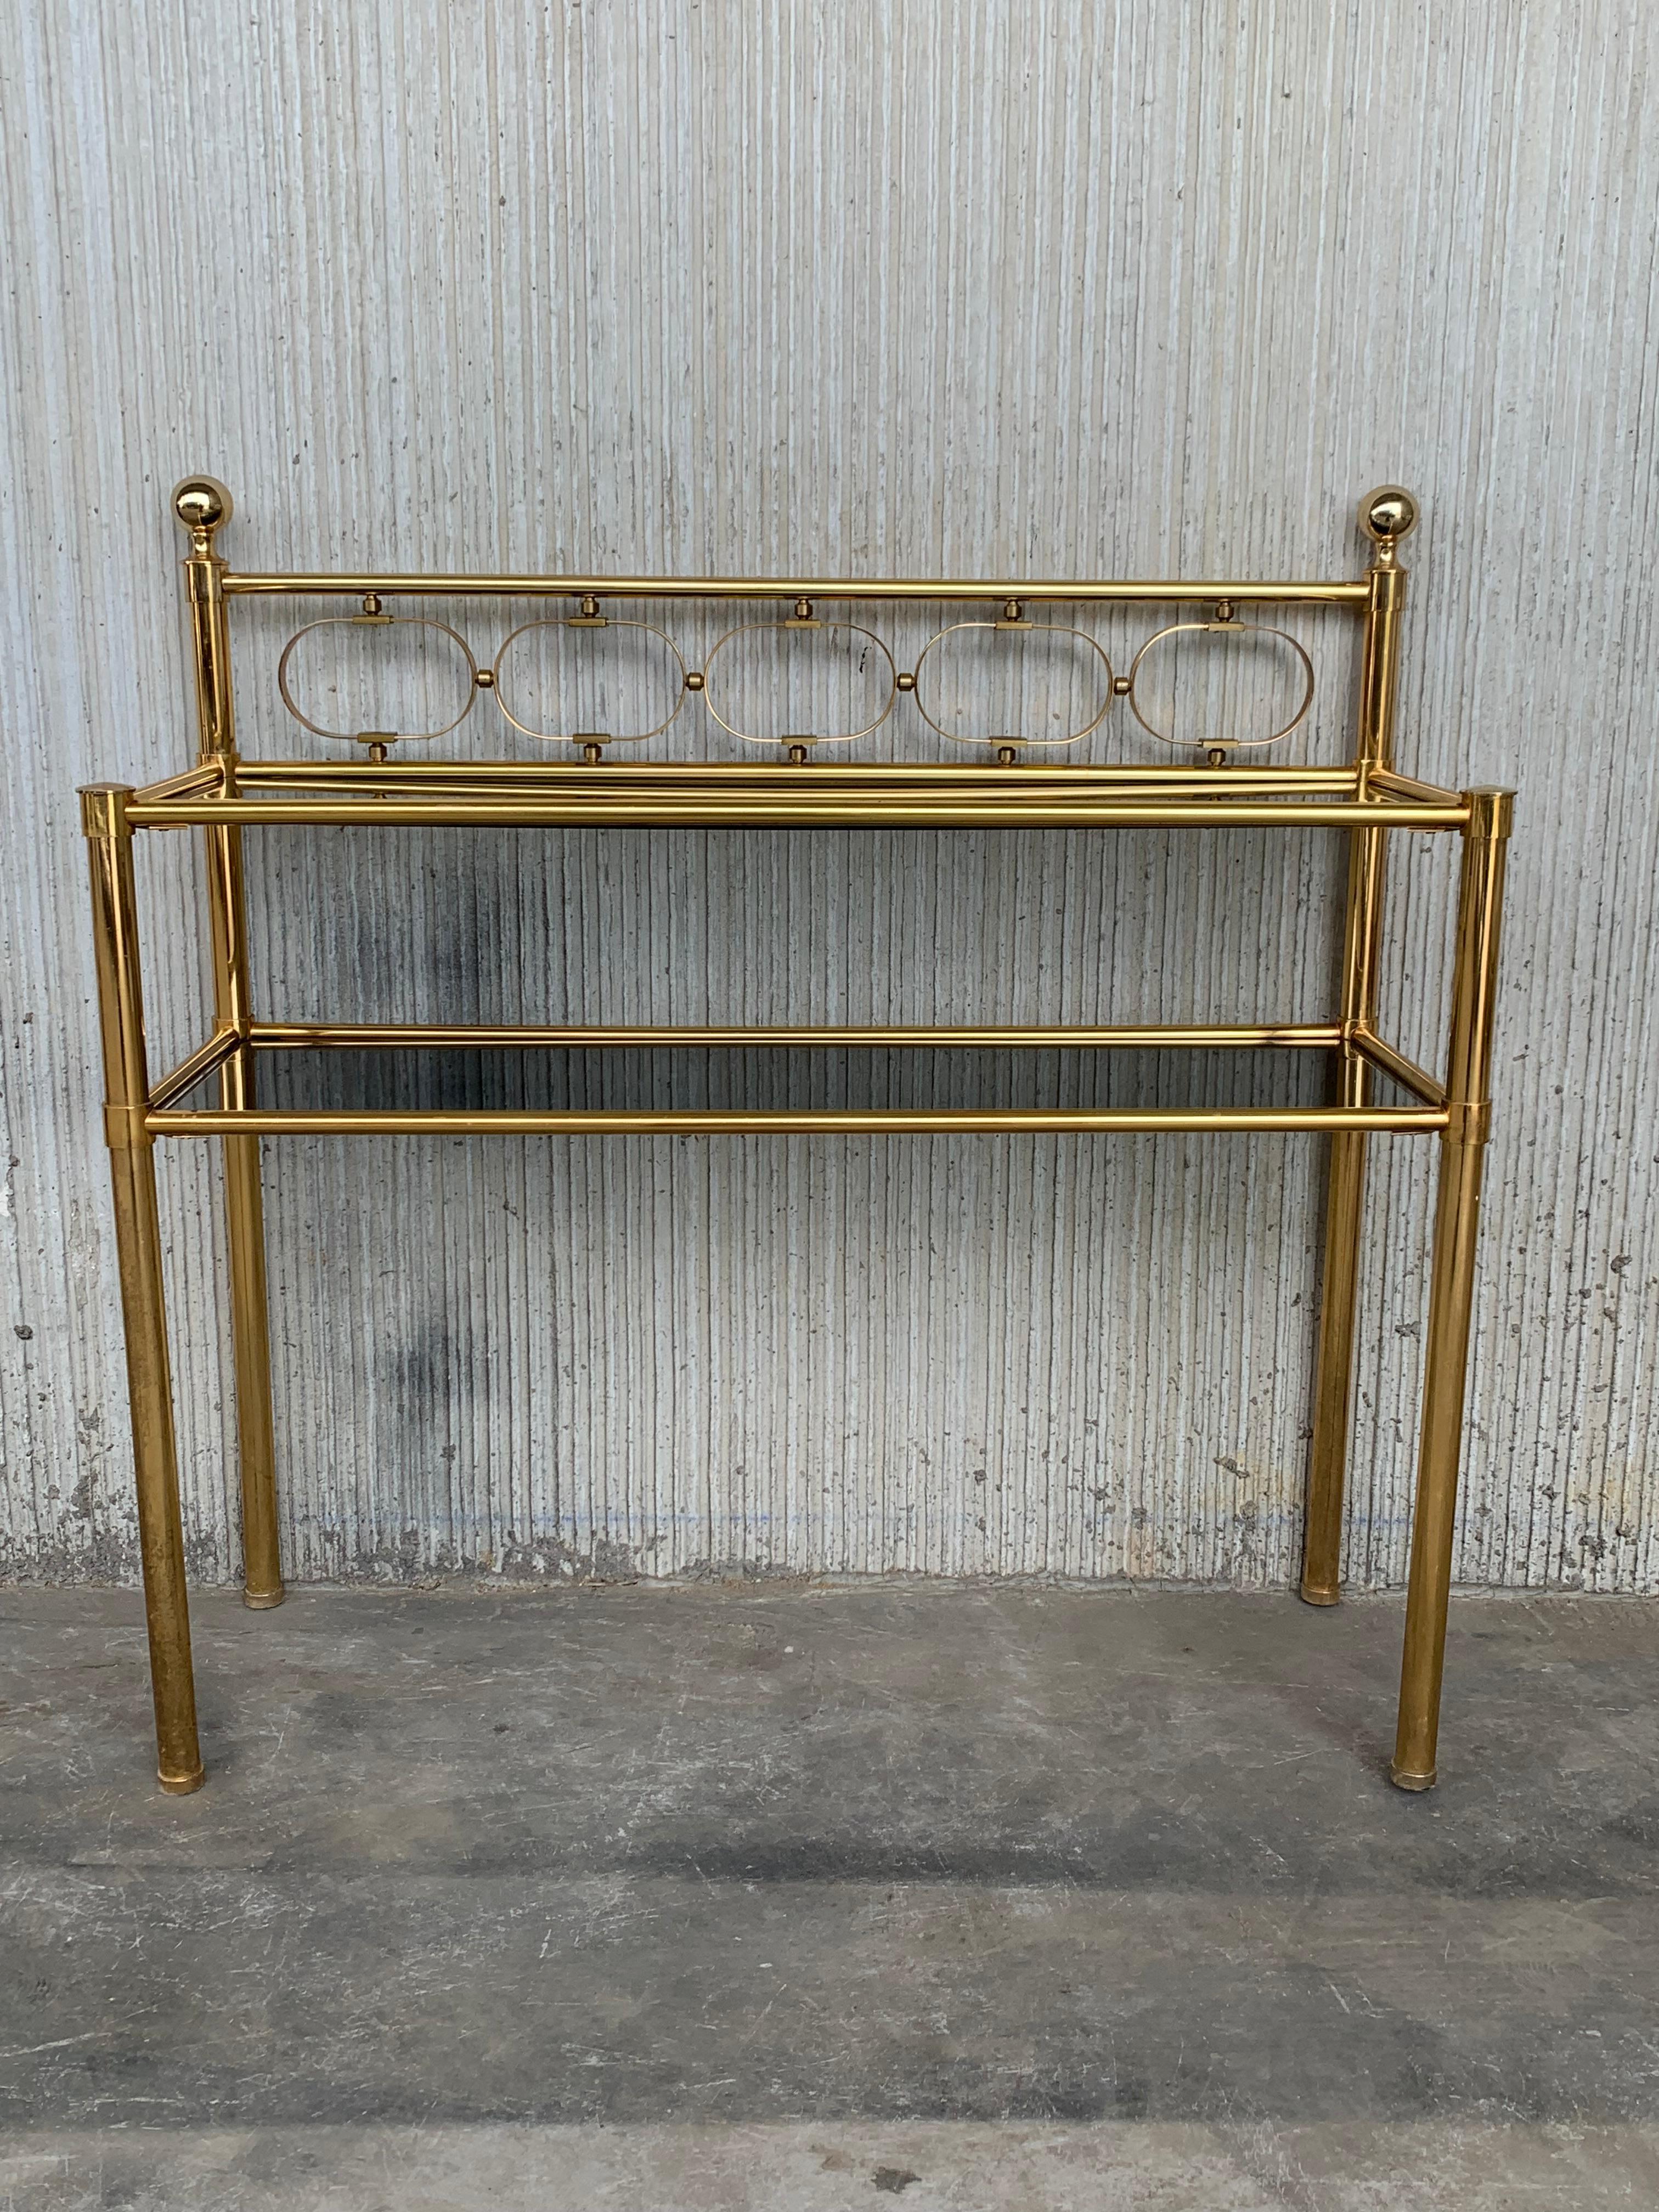 Mid-century modern brass console table with two fumee glass shelves

Height to the low shelve: 20.86in
Height to the hight shelve: 29.52in.